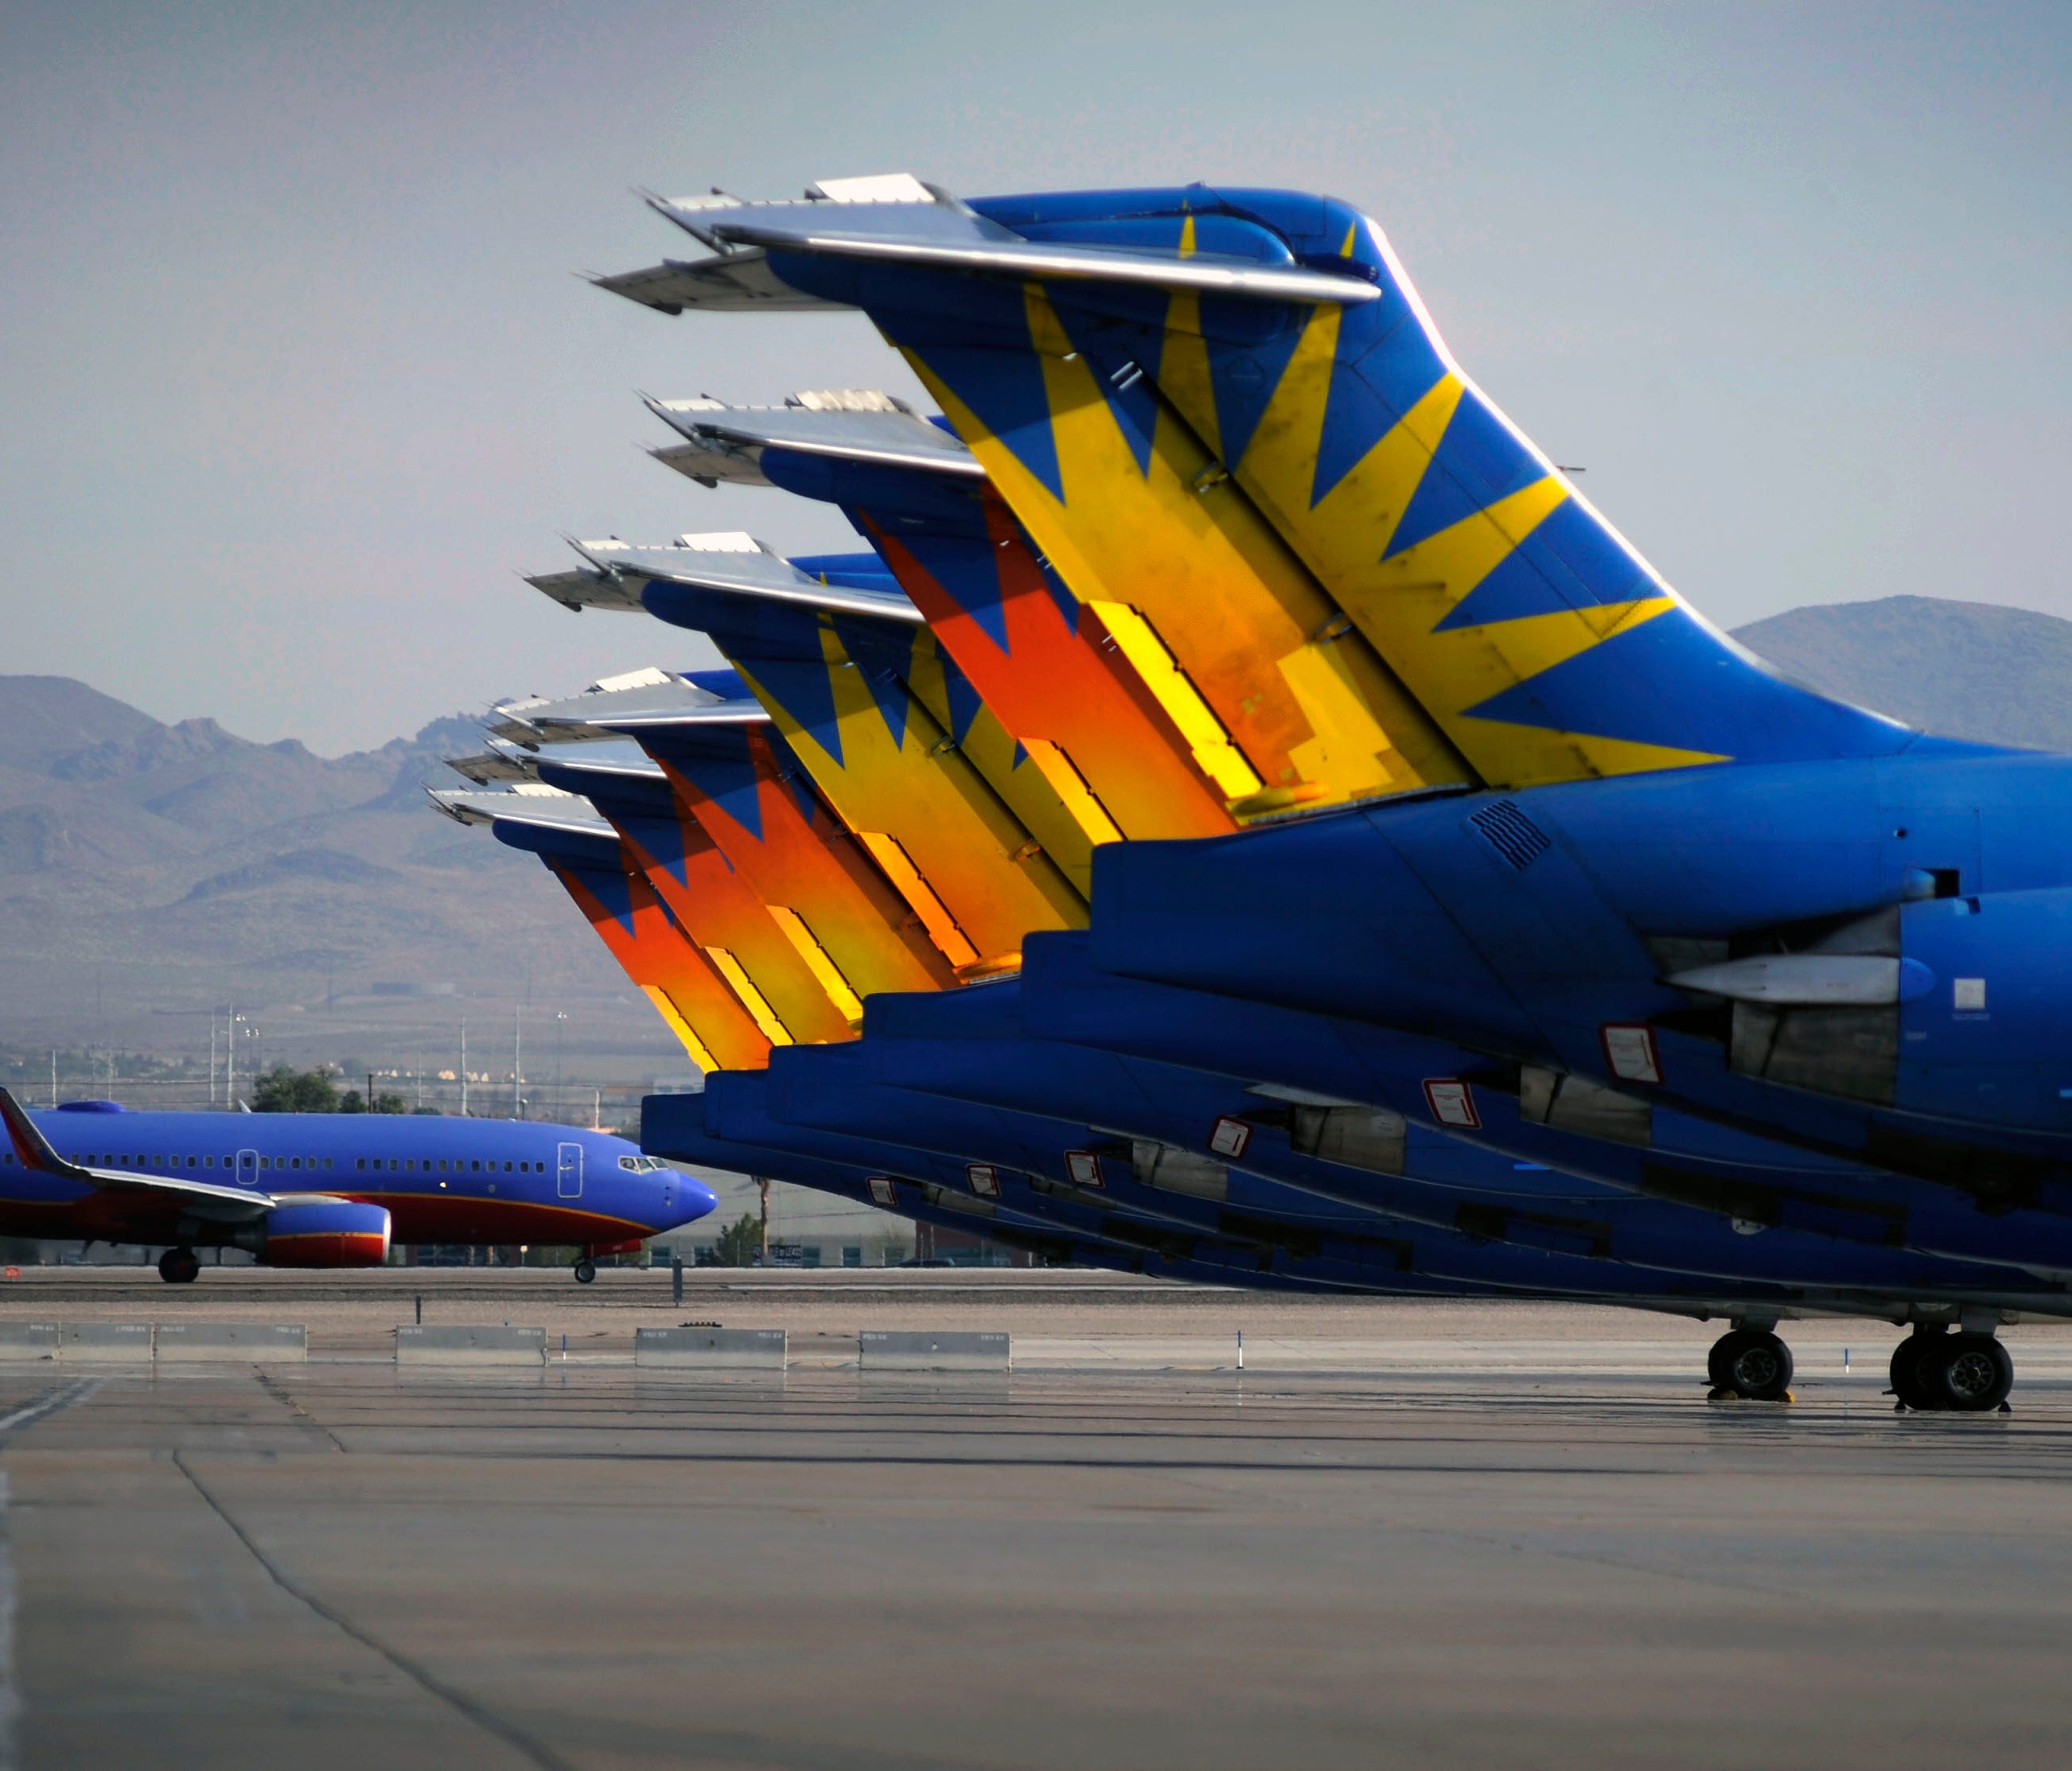 A Southwest Airlines plane taxis by parked Allegiant Air jetliners at McCarran International Airport in Las Vegas on May 9, 2013.